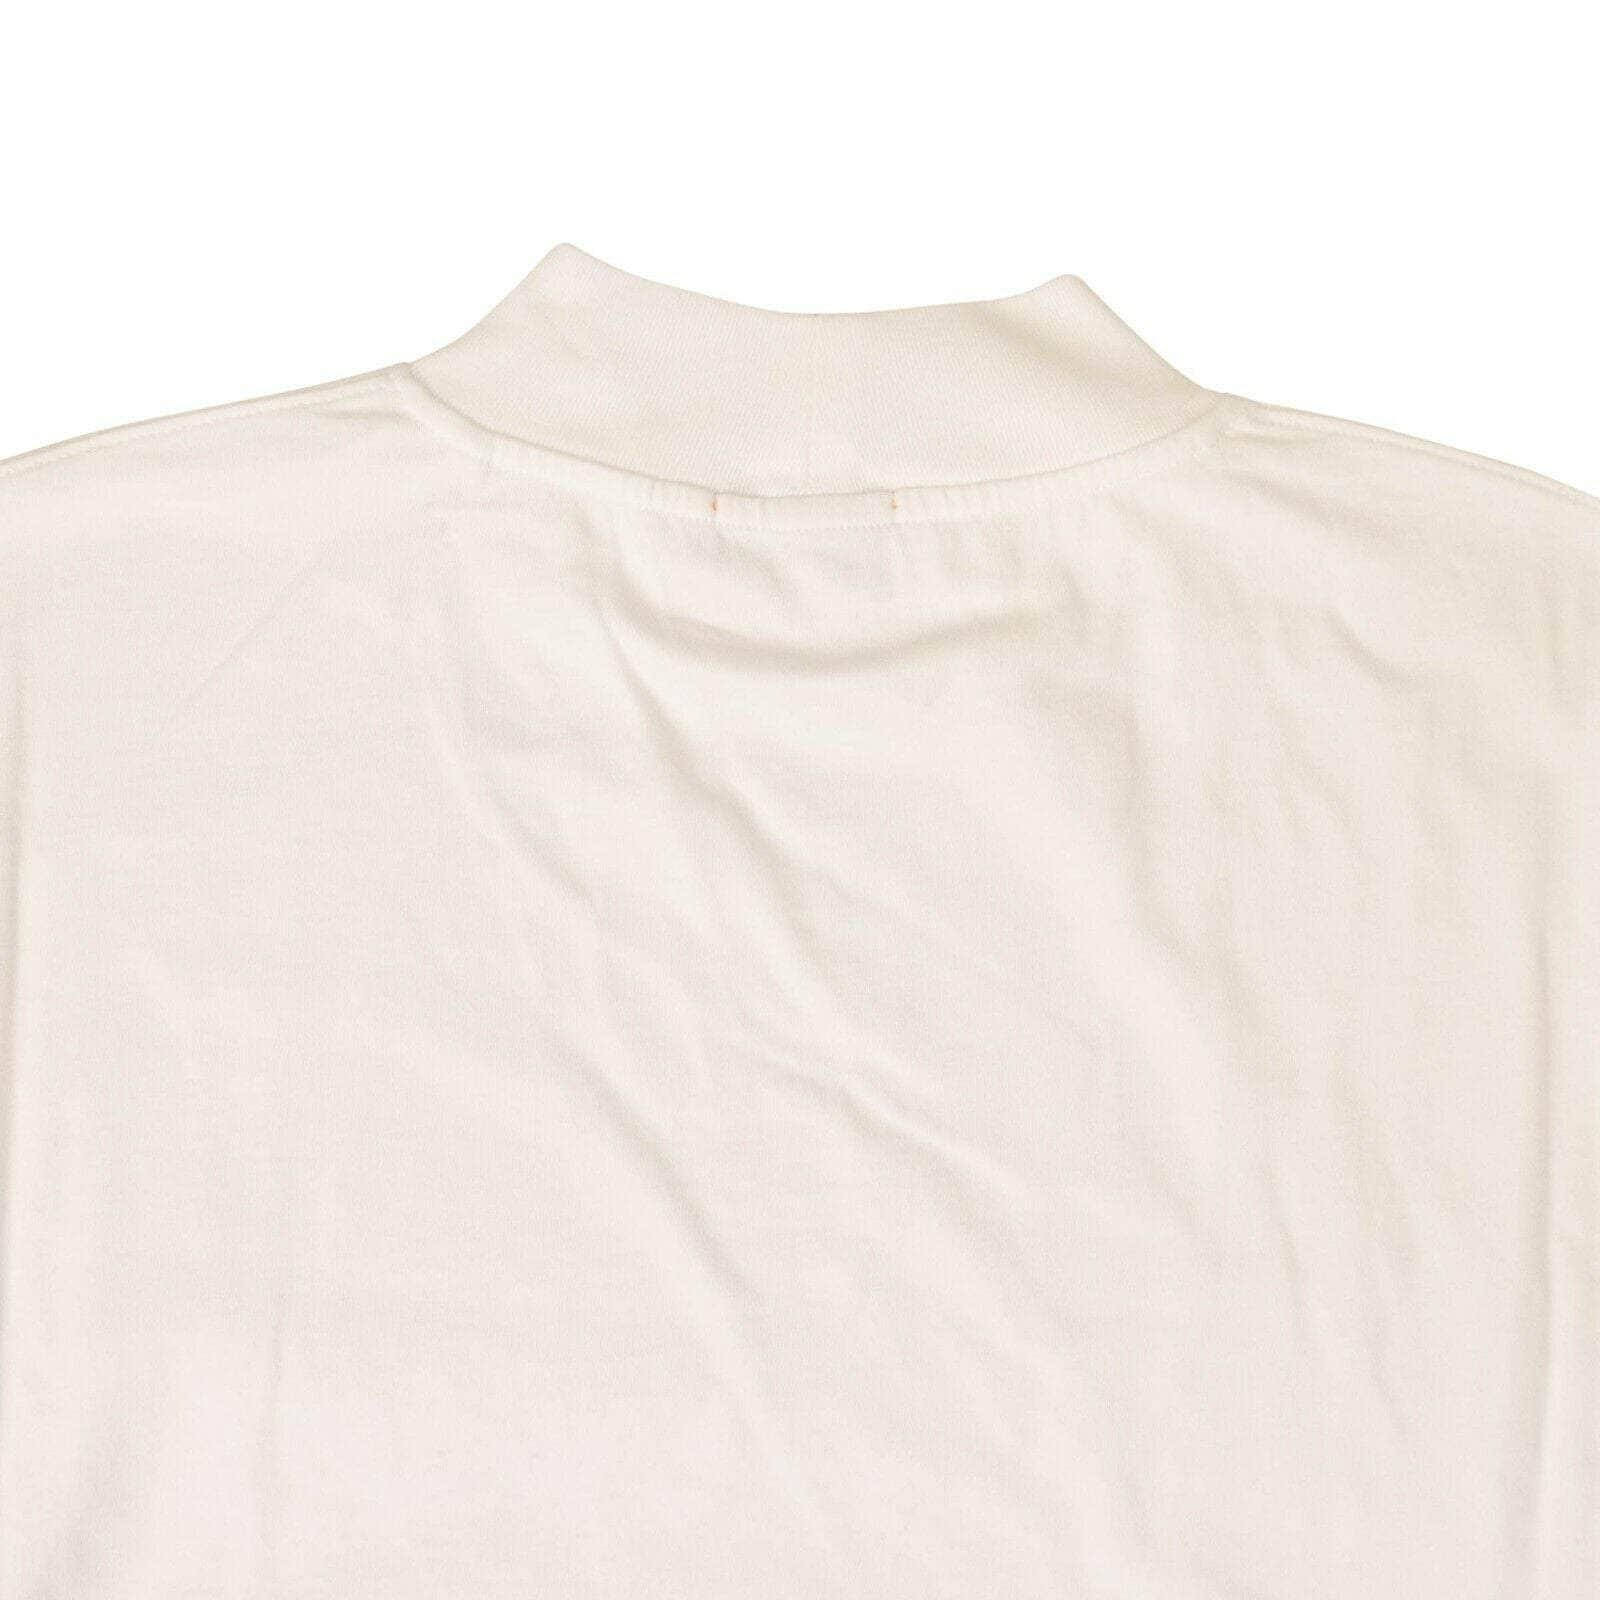 Heron Preston channelenable-all, chicmi, couponcollection, gender-mens, heron-preston, main-clothing, size-m, size-s, size-xl, size-xs, under-250 White Logo Turtleneck Long Sleeve T-Shirt